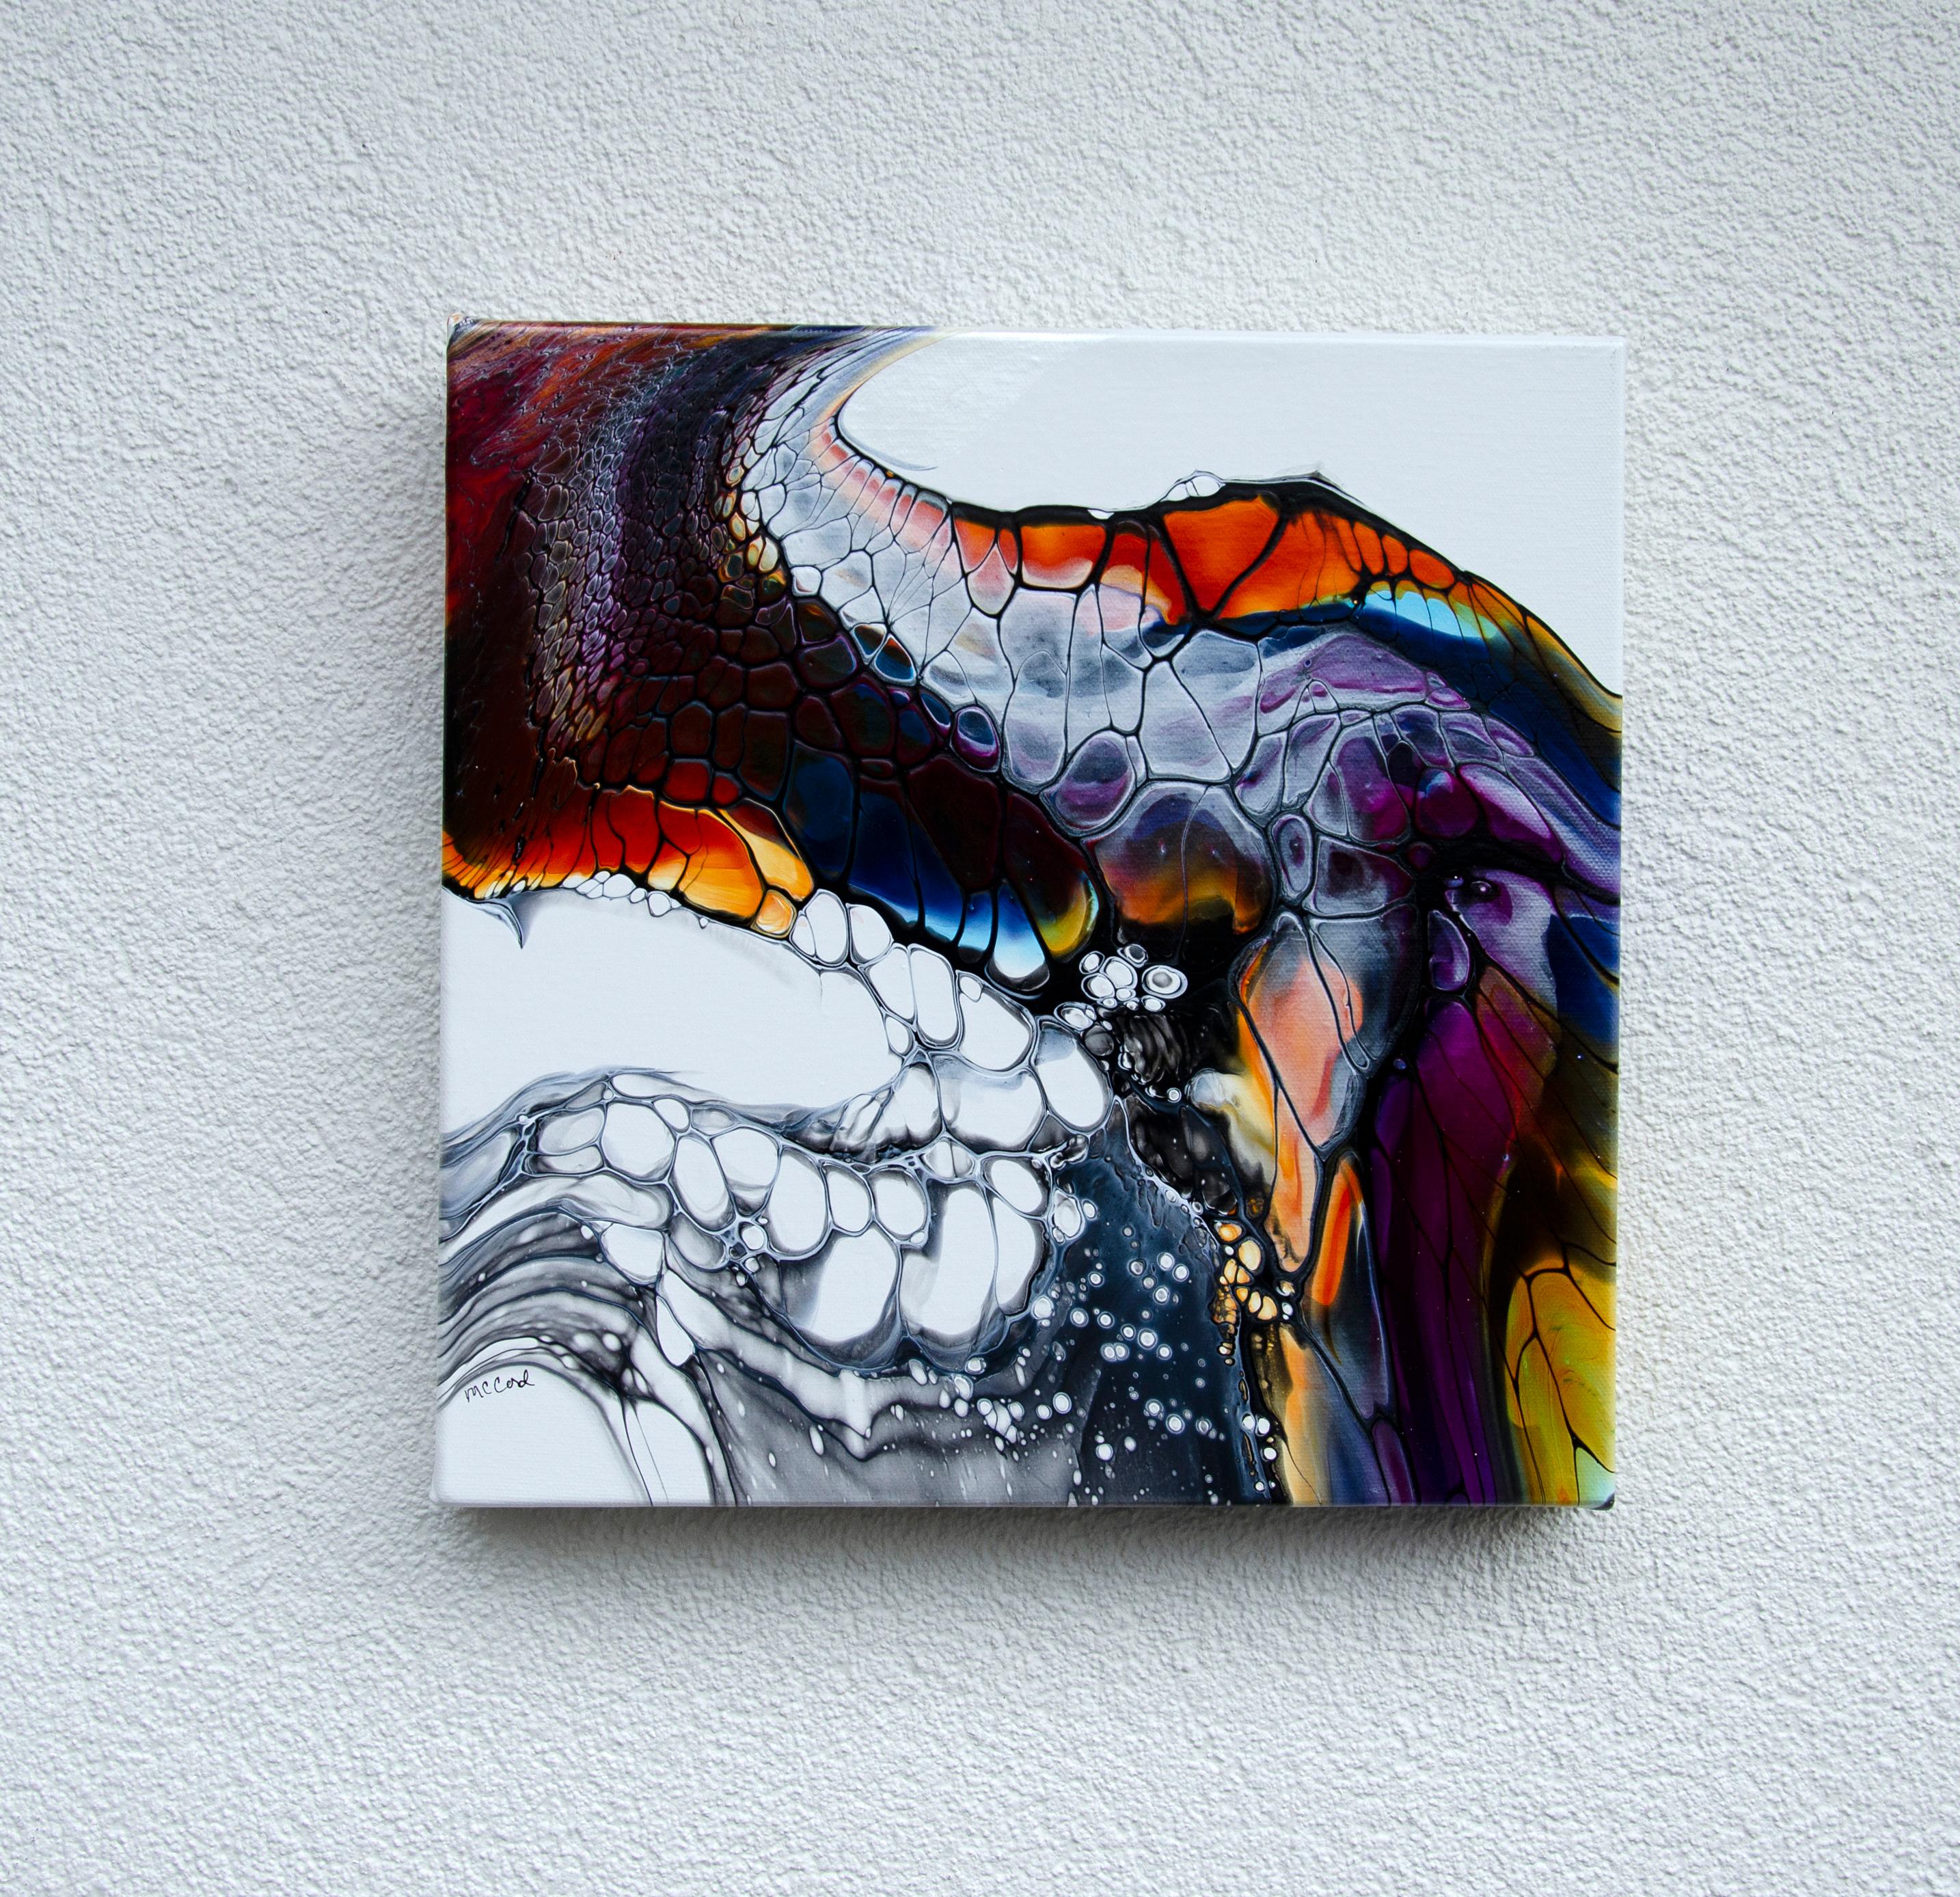 <p>Artist Comments<br>As a part of the Reptile series, artist Linda McCord creates a captivating abstract artwork crafted through the acrylic pouring technique. The vibrant and metallic colors blend seamlessly in a scale-like and fluid pattern,